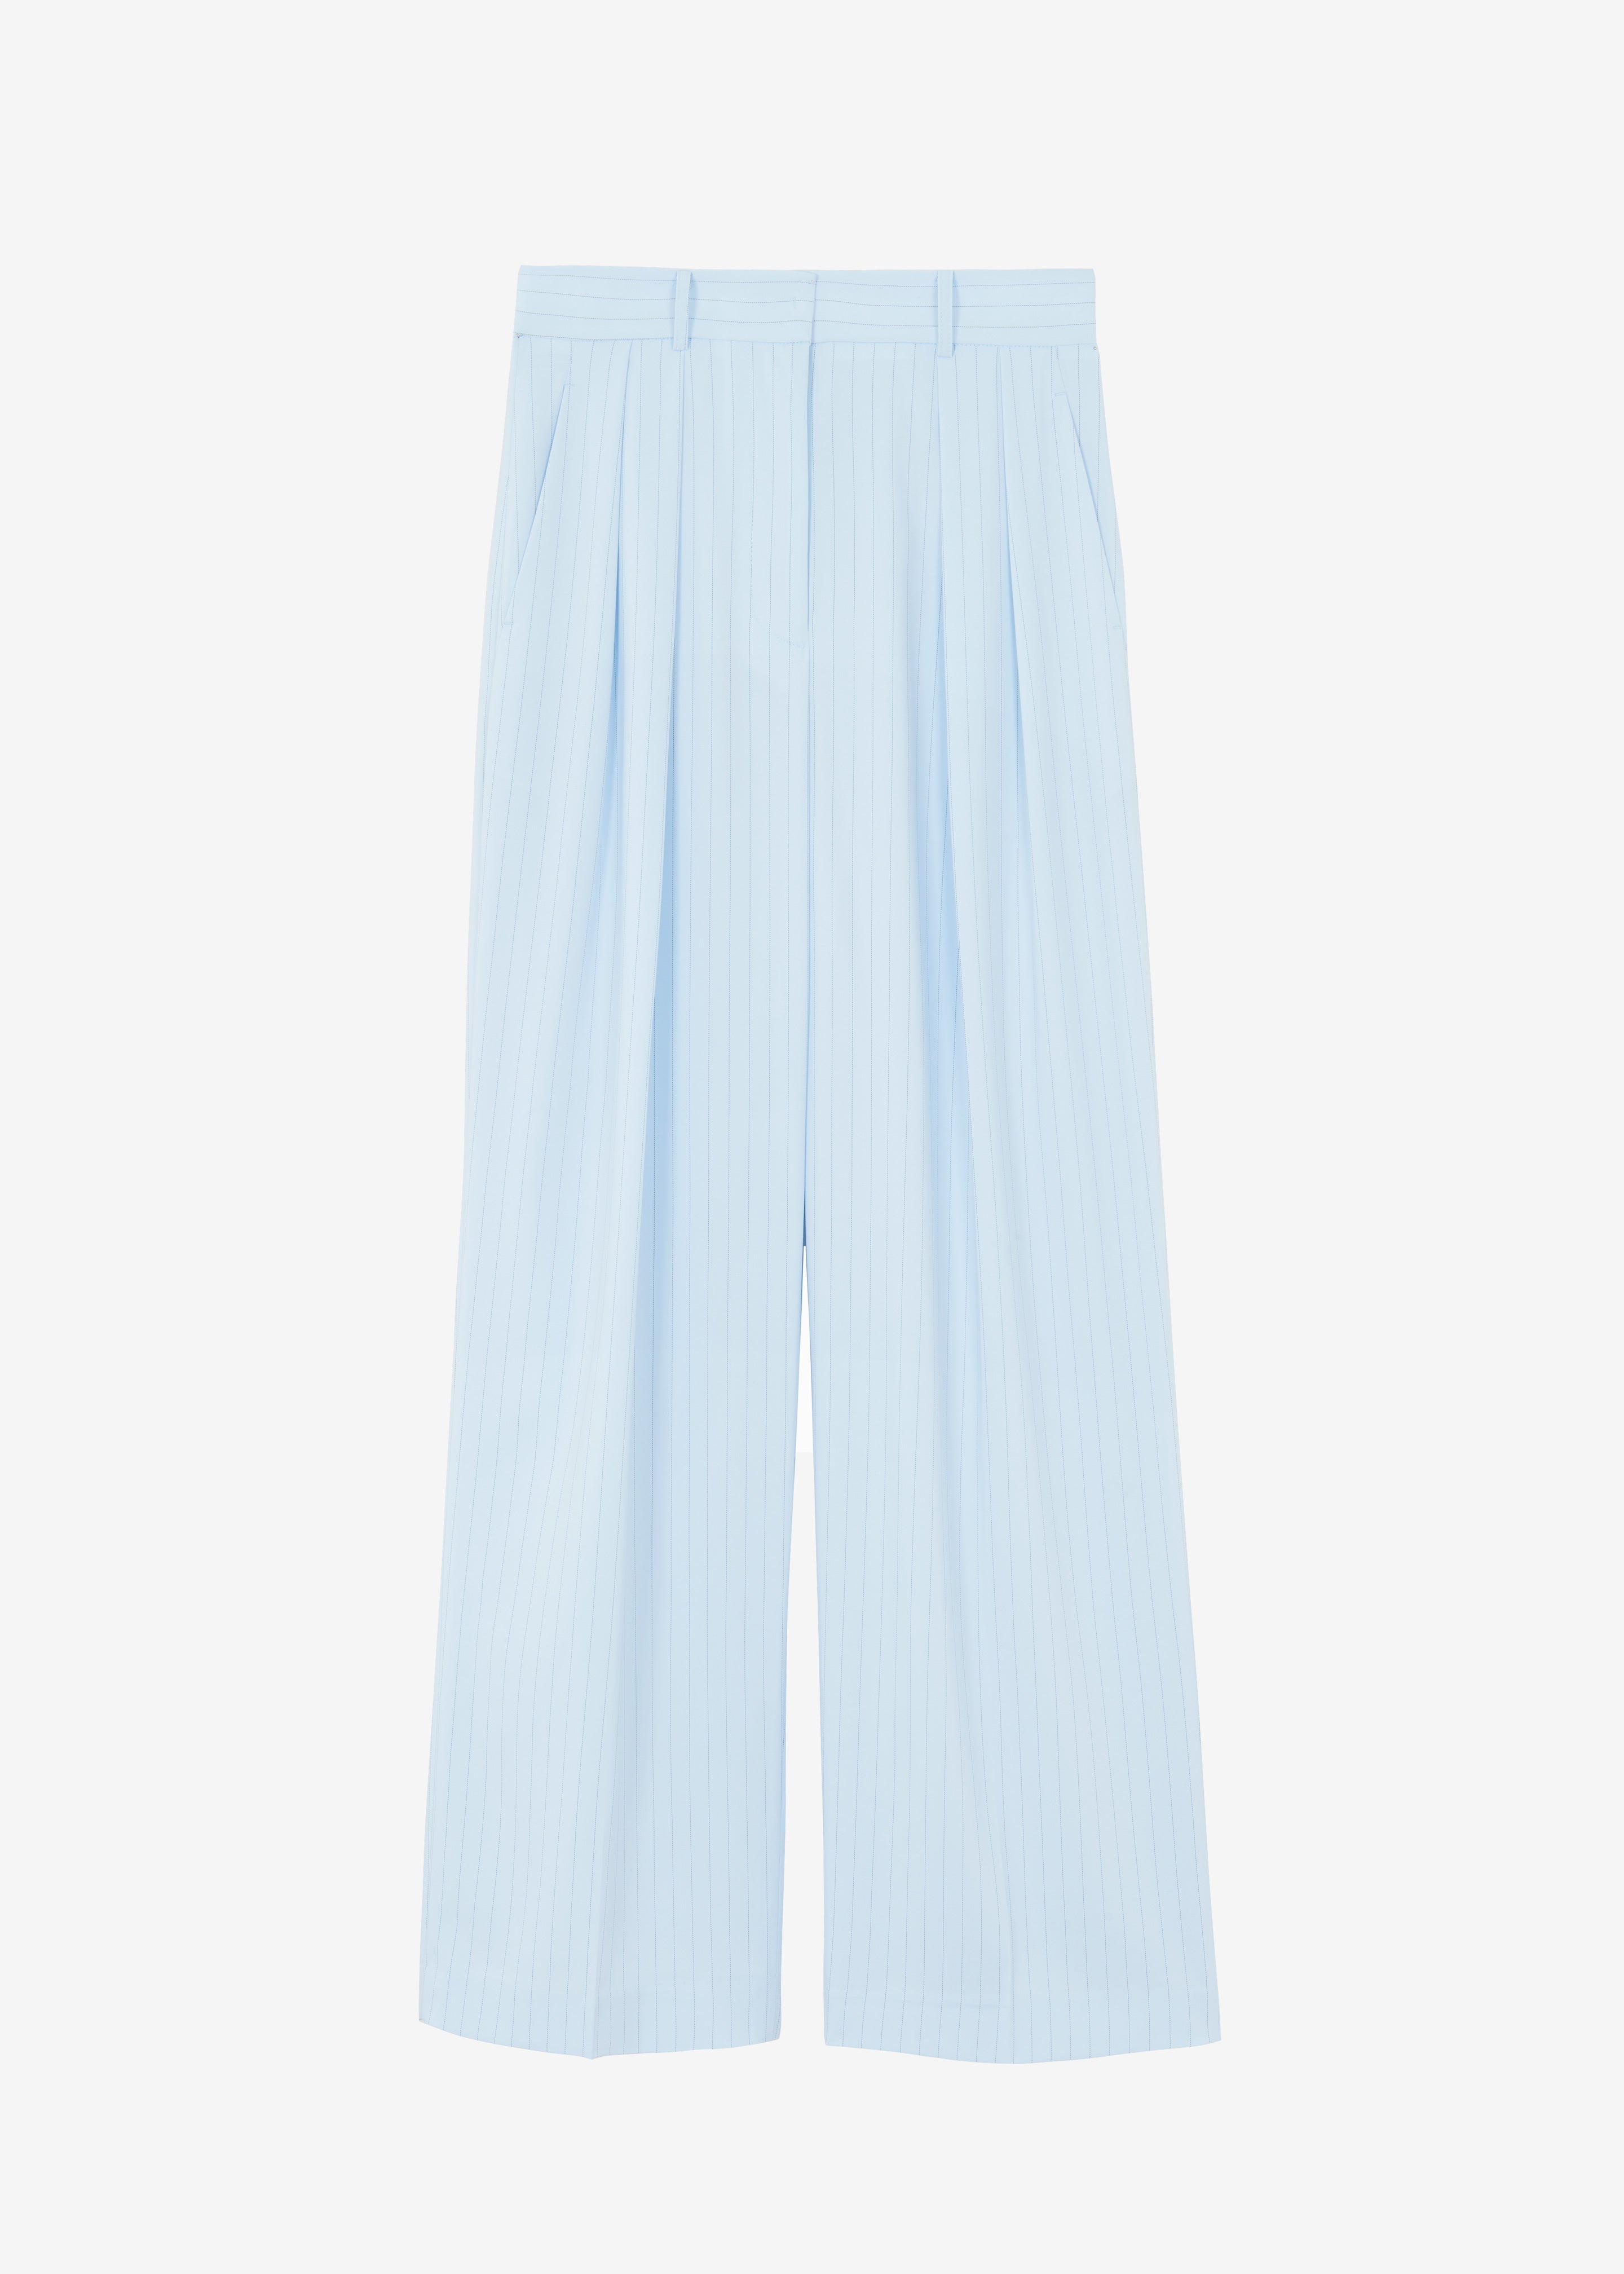 Tansy Fluid Pleated Trousers - Blue Pinstripe - 7